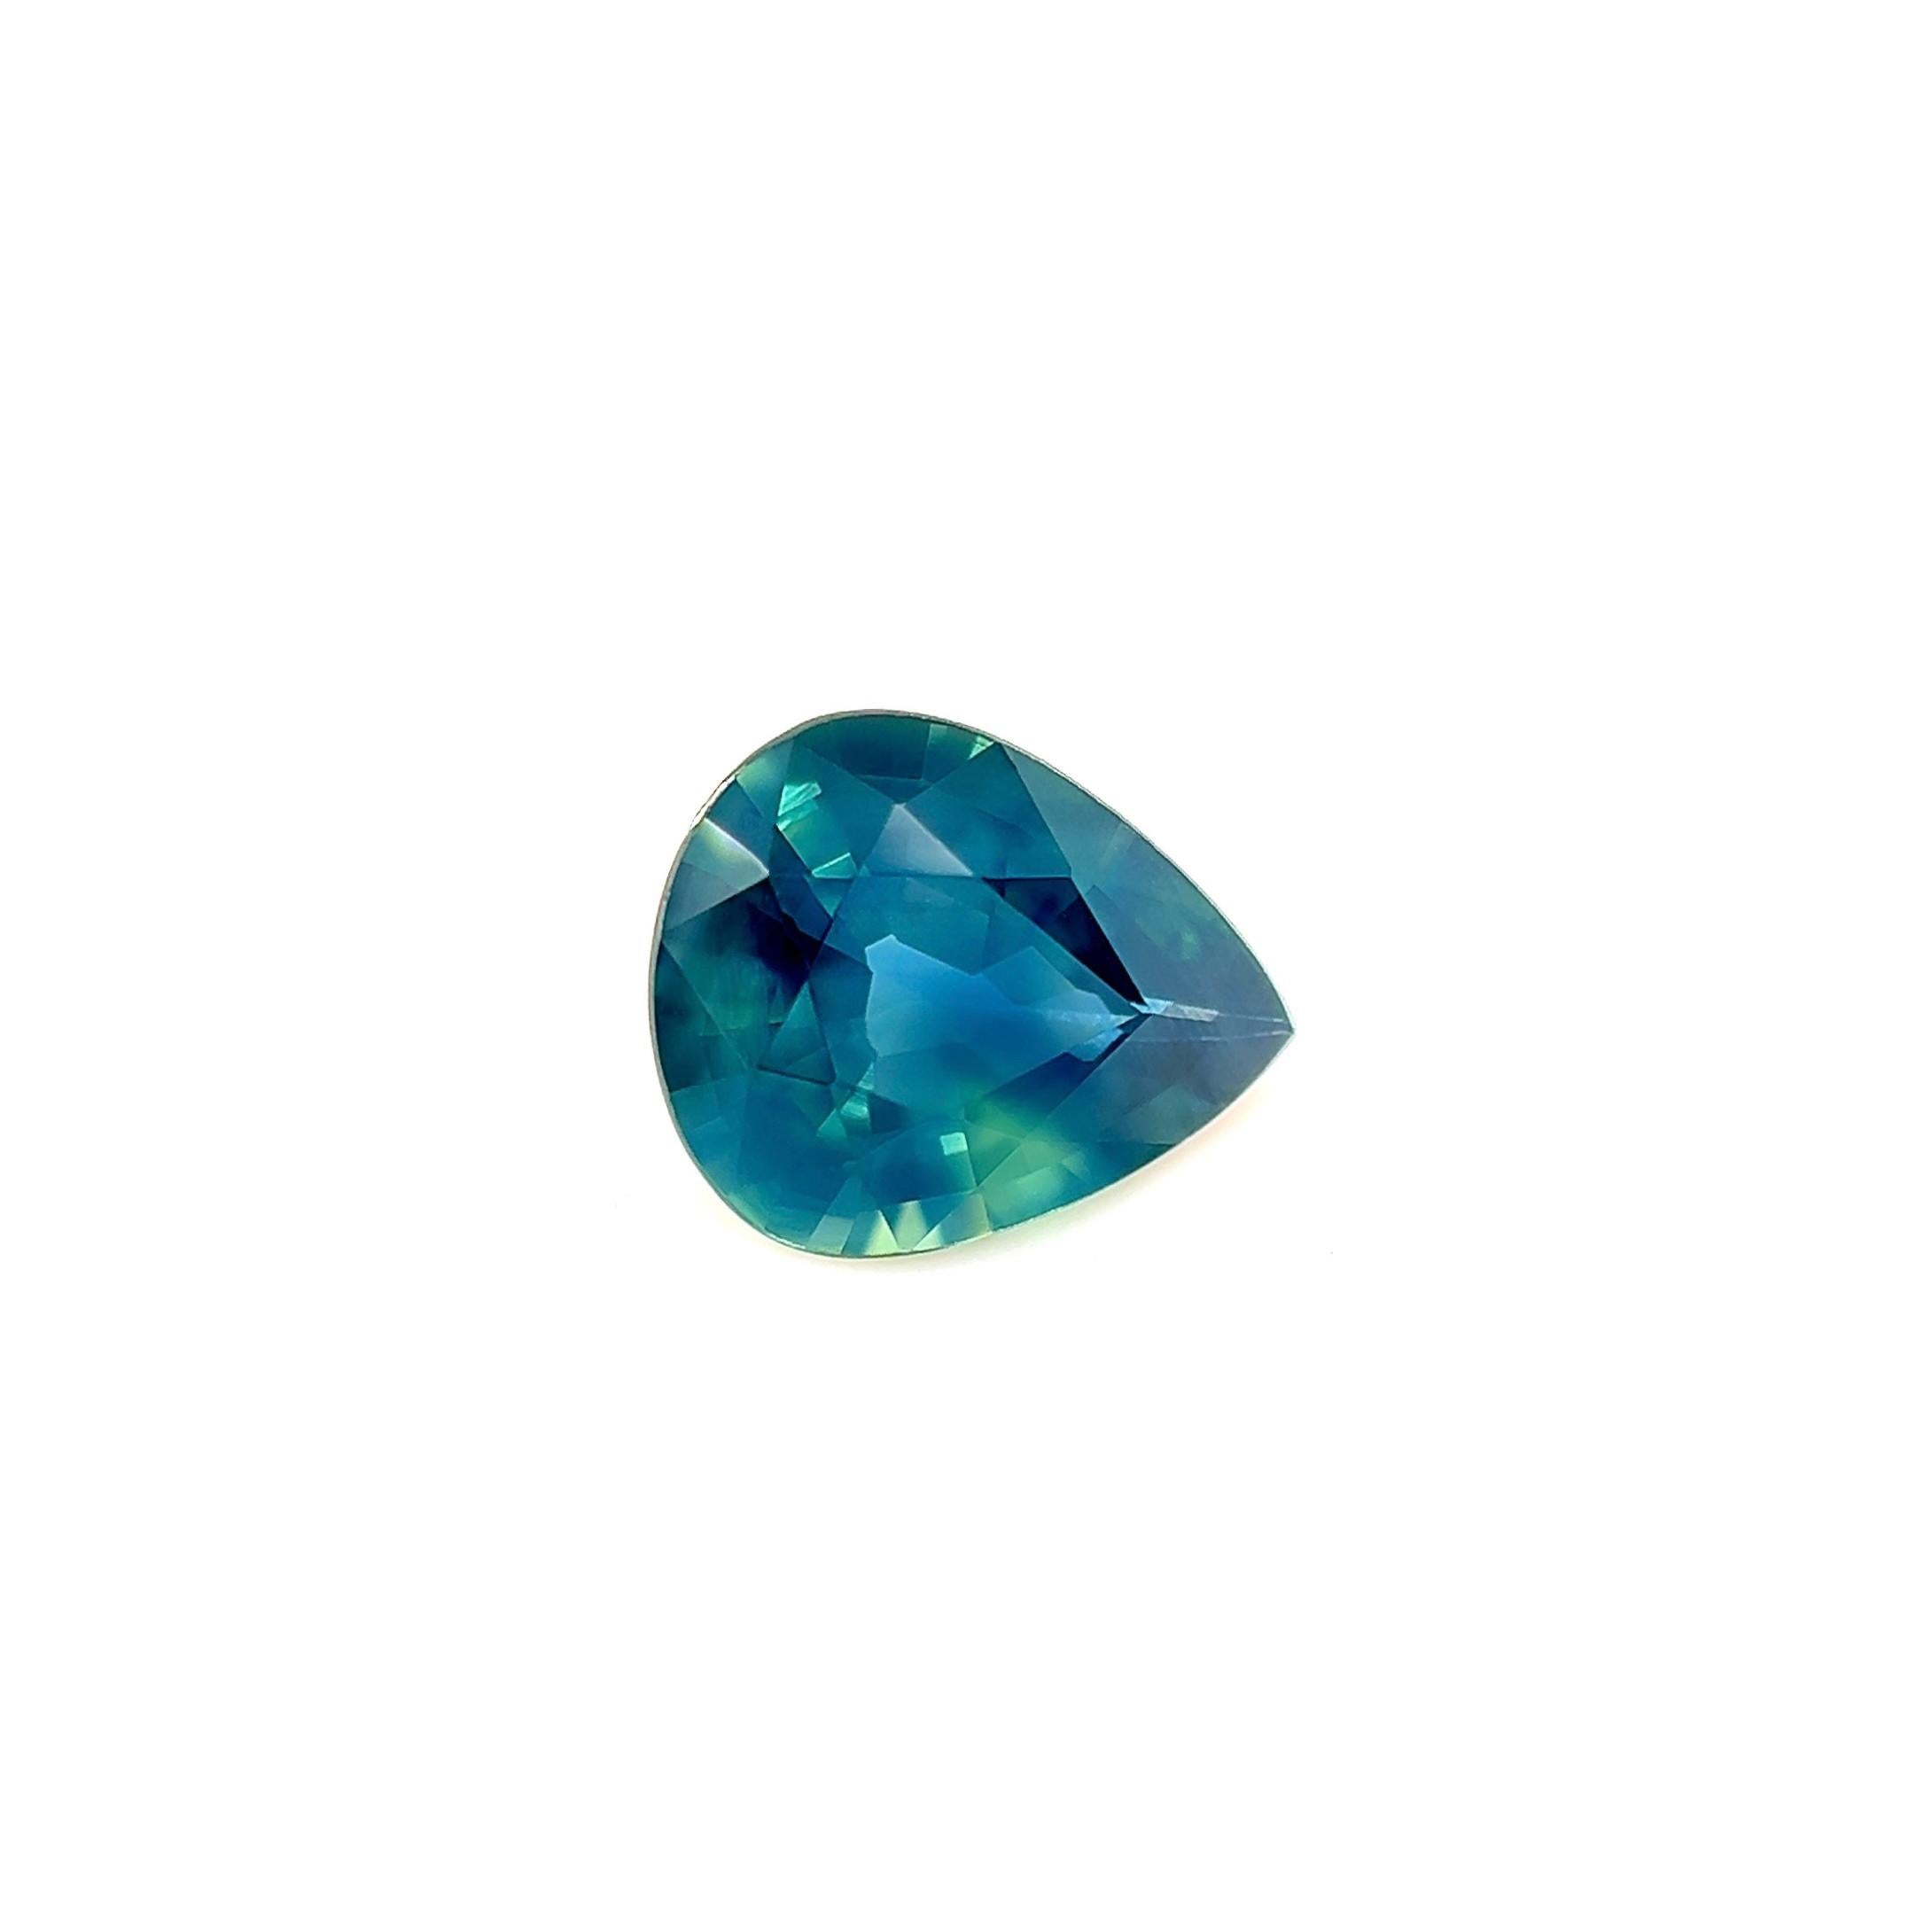 GIA Certified 1.13Ct Natural Sapphire Unique Green Blue Teal Pear Cut Untreated

Natural Fine Green Blue Teal GIA Certified Sapphire Gemstone.
Fine quality sapphire with a unique teal blue green colour.
1.13 Carat with very good clarity, a very